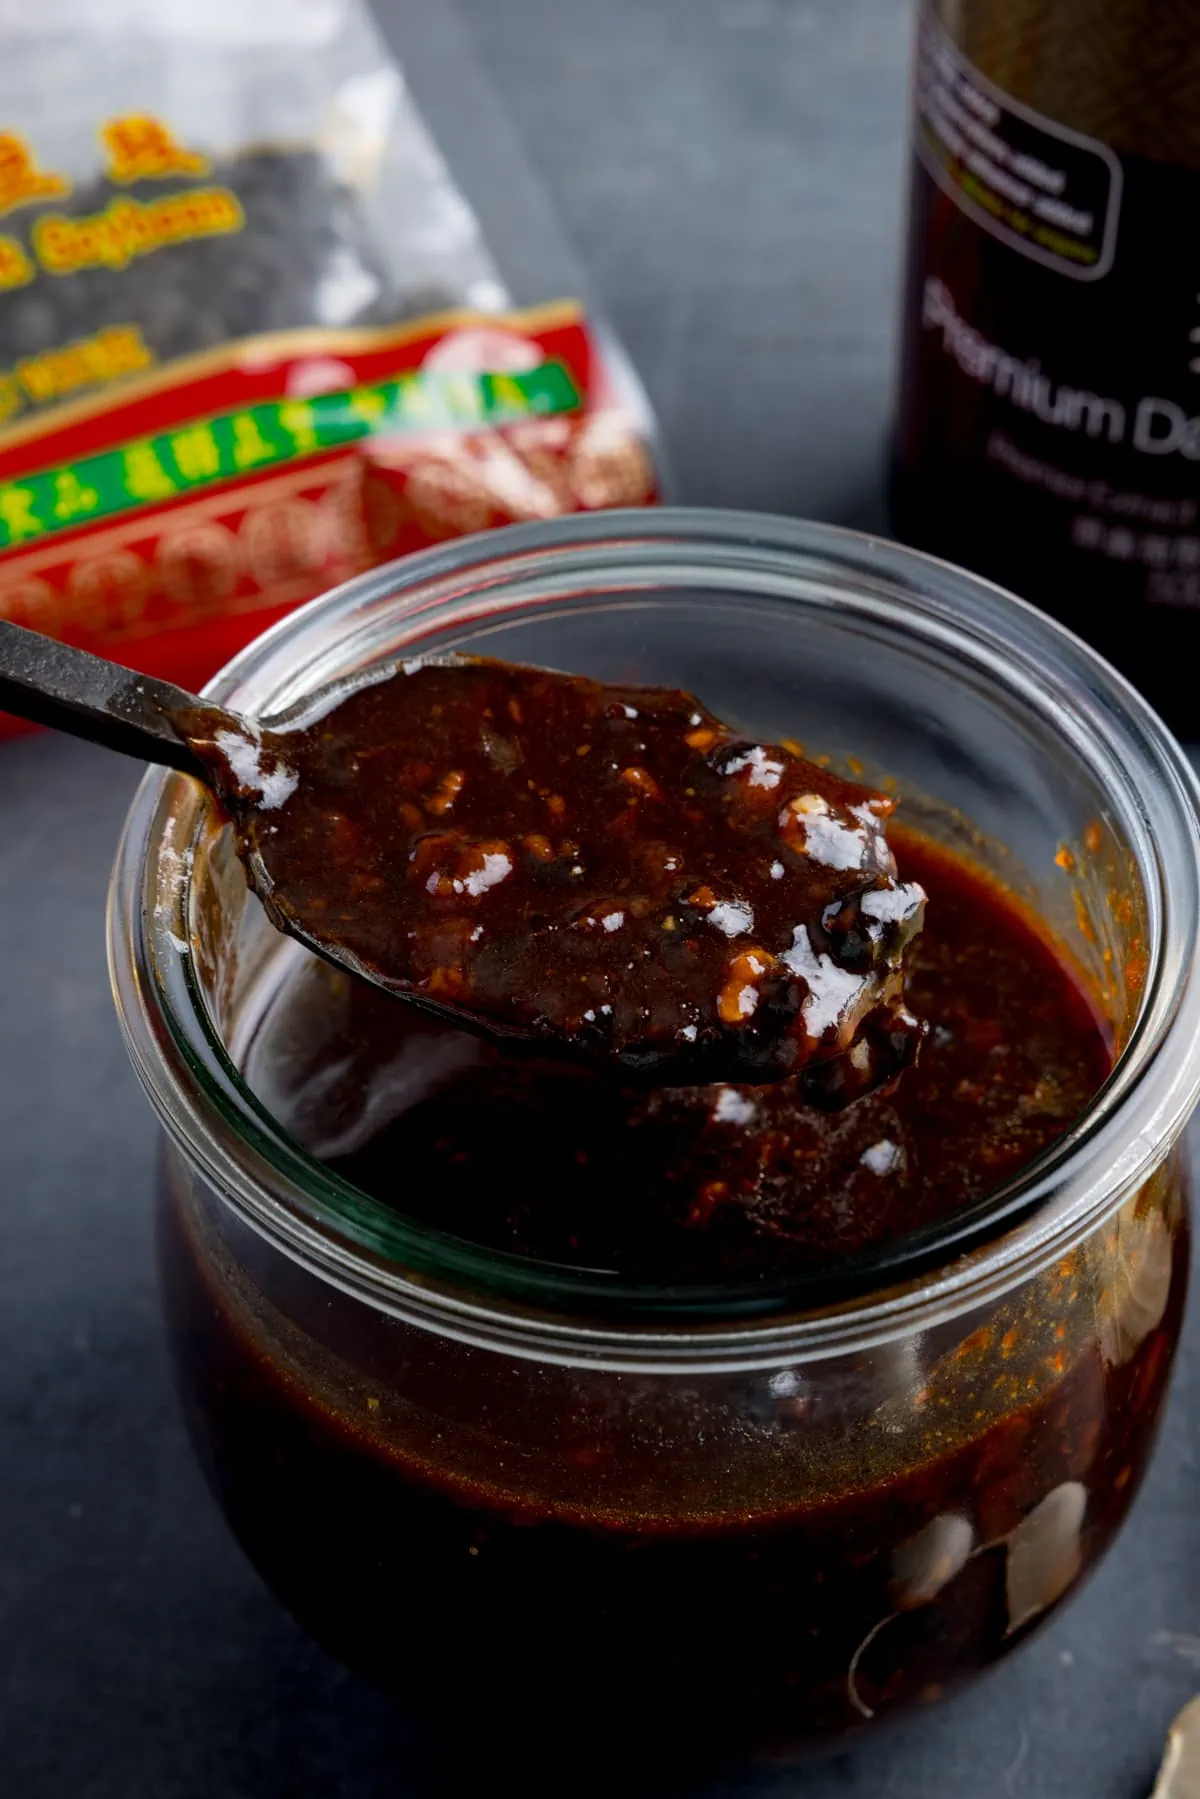 A glass jar filled with homemade black bean sauce. There is a black spoon, taking a spoonful from the jar. The jar is on a dark surface and there are ingredients at the bottom.